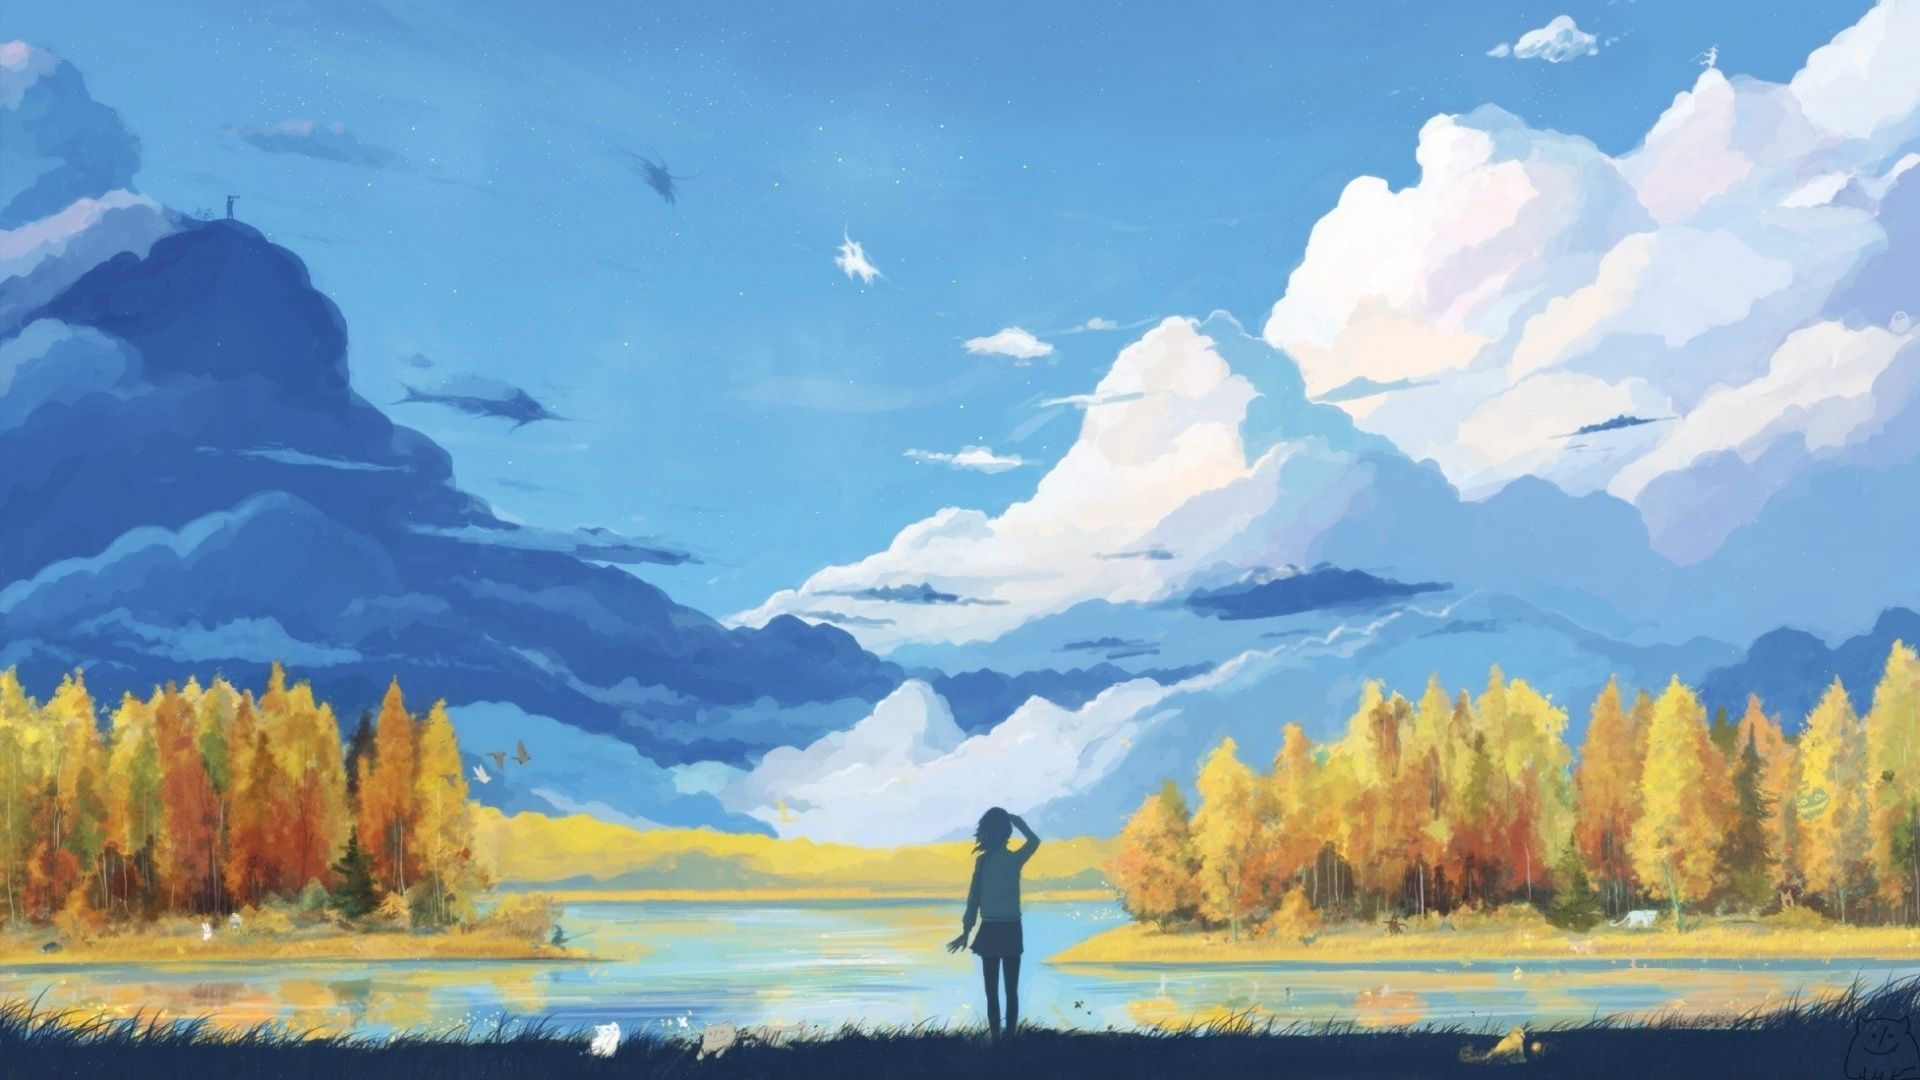 Artistic landscape of a person standing in a forest - Anime landscape